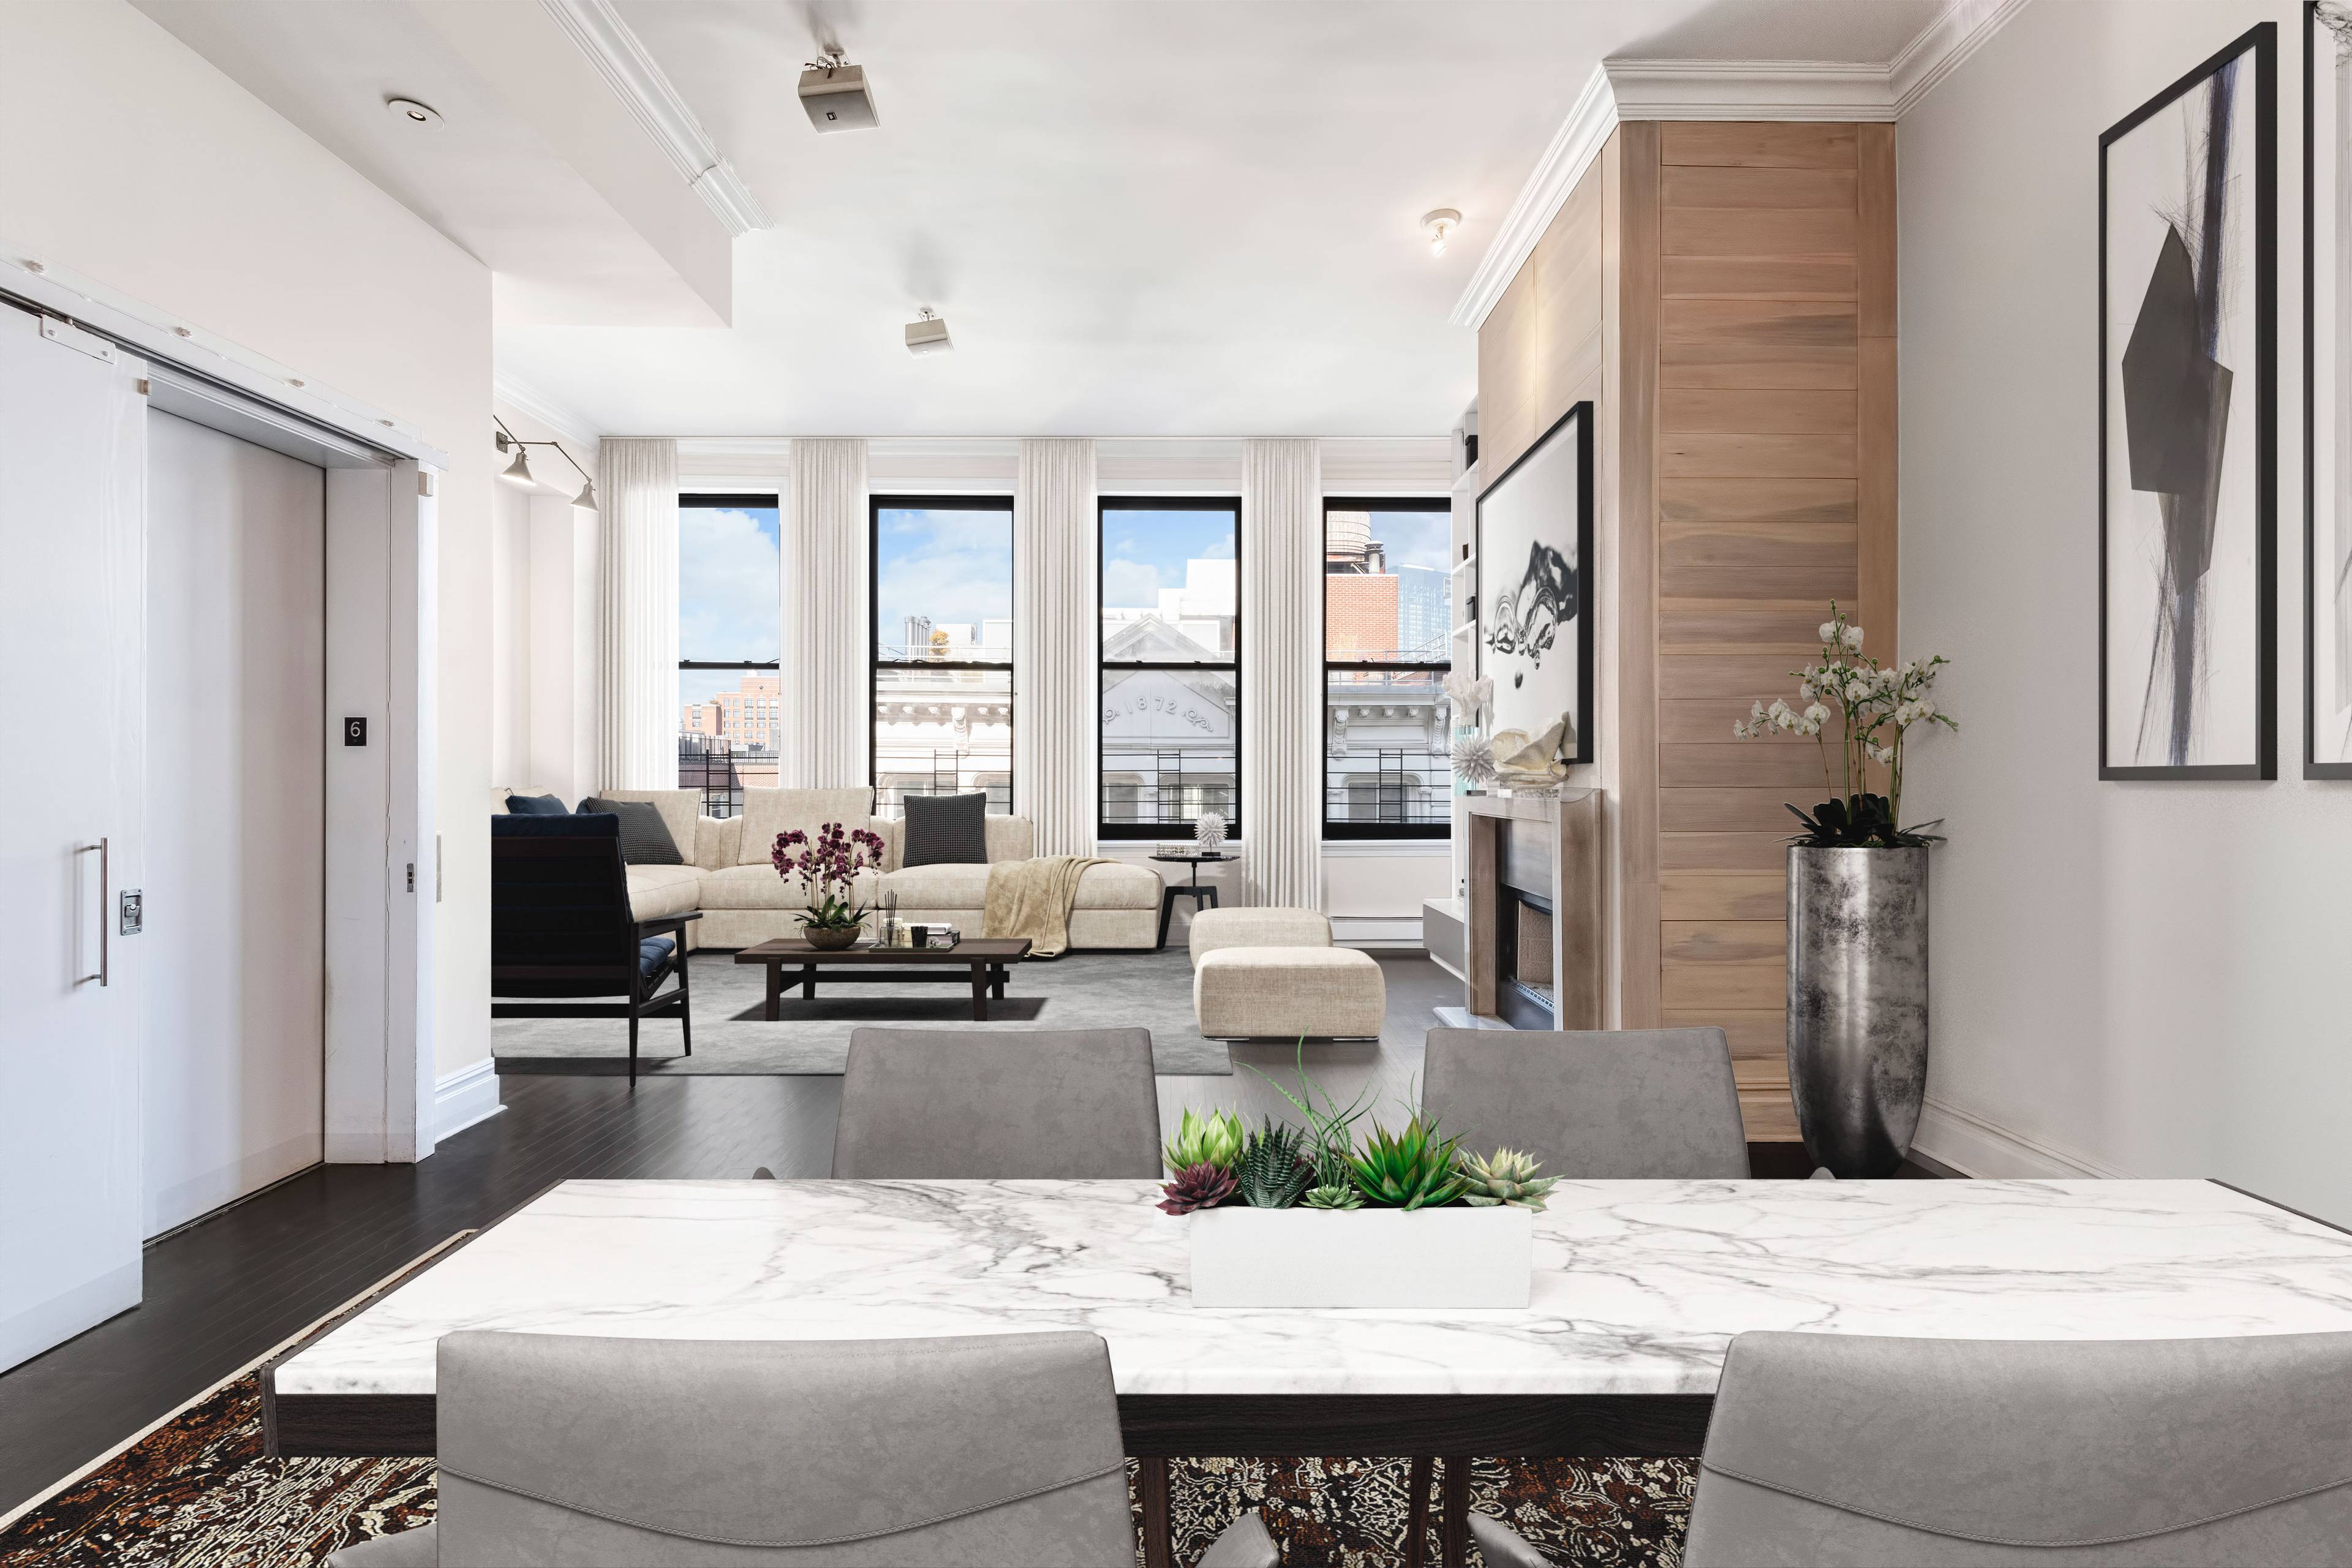 Stunning & Bright 2 Bed + Home Office SOHO Loft with 13ft Ceilings